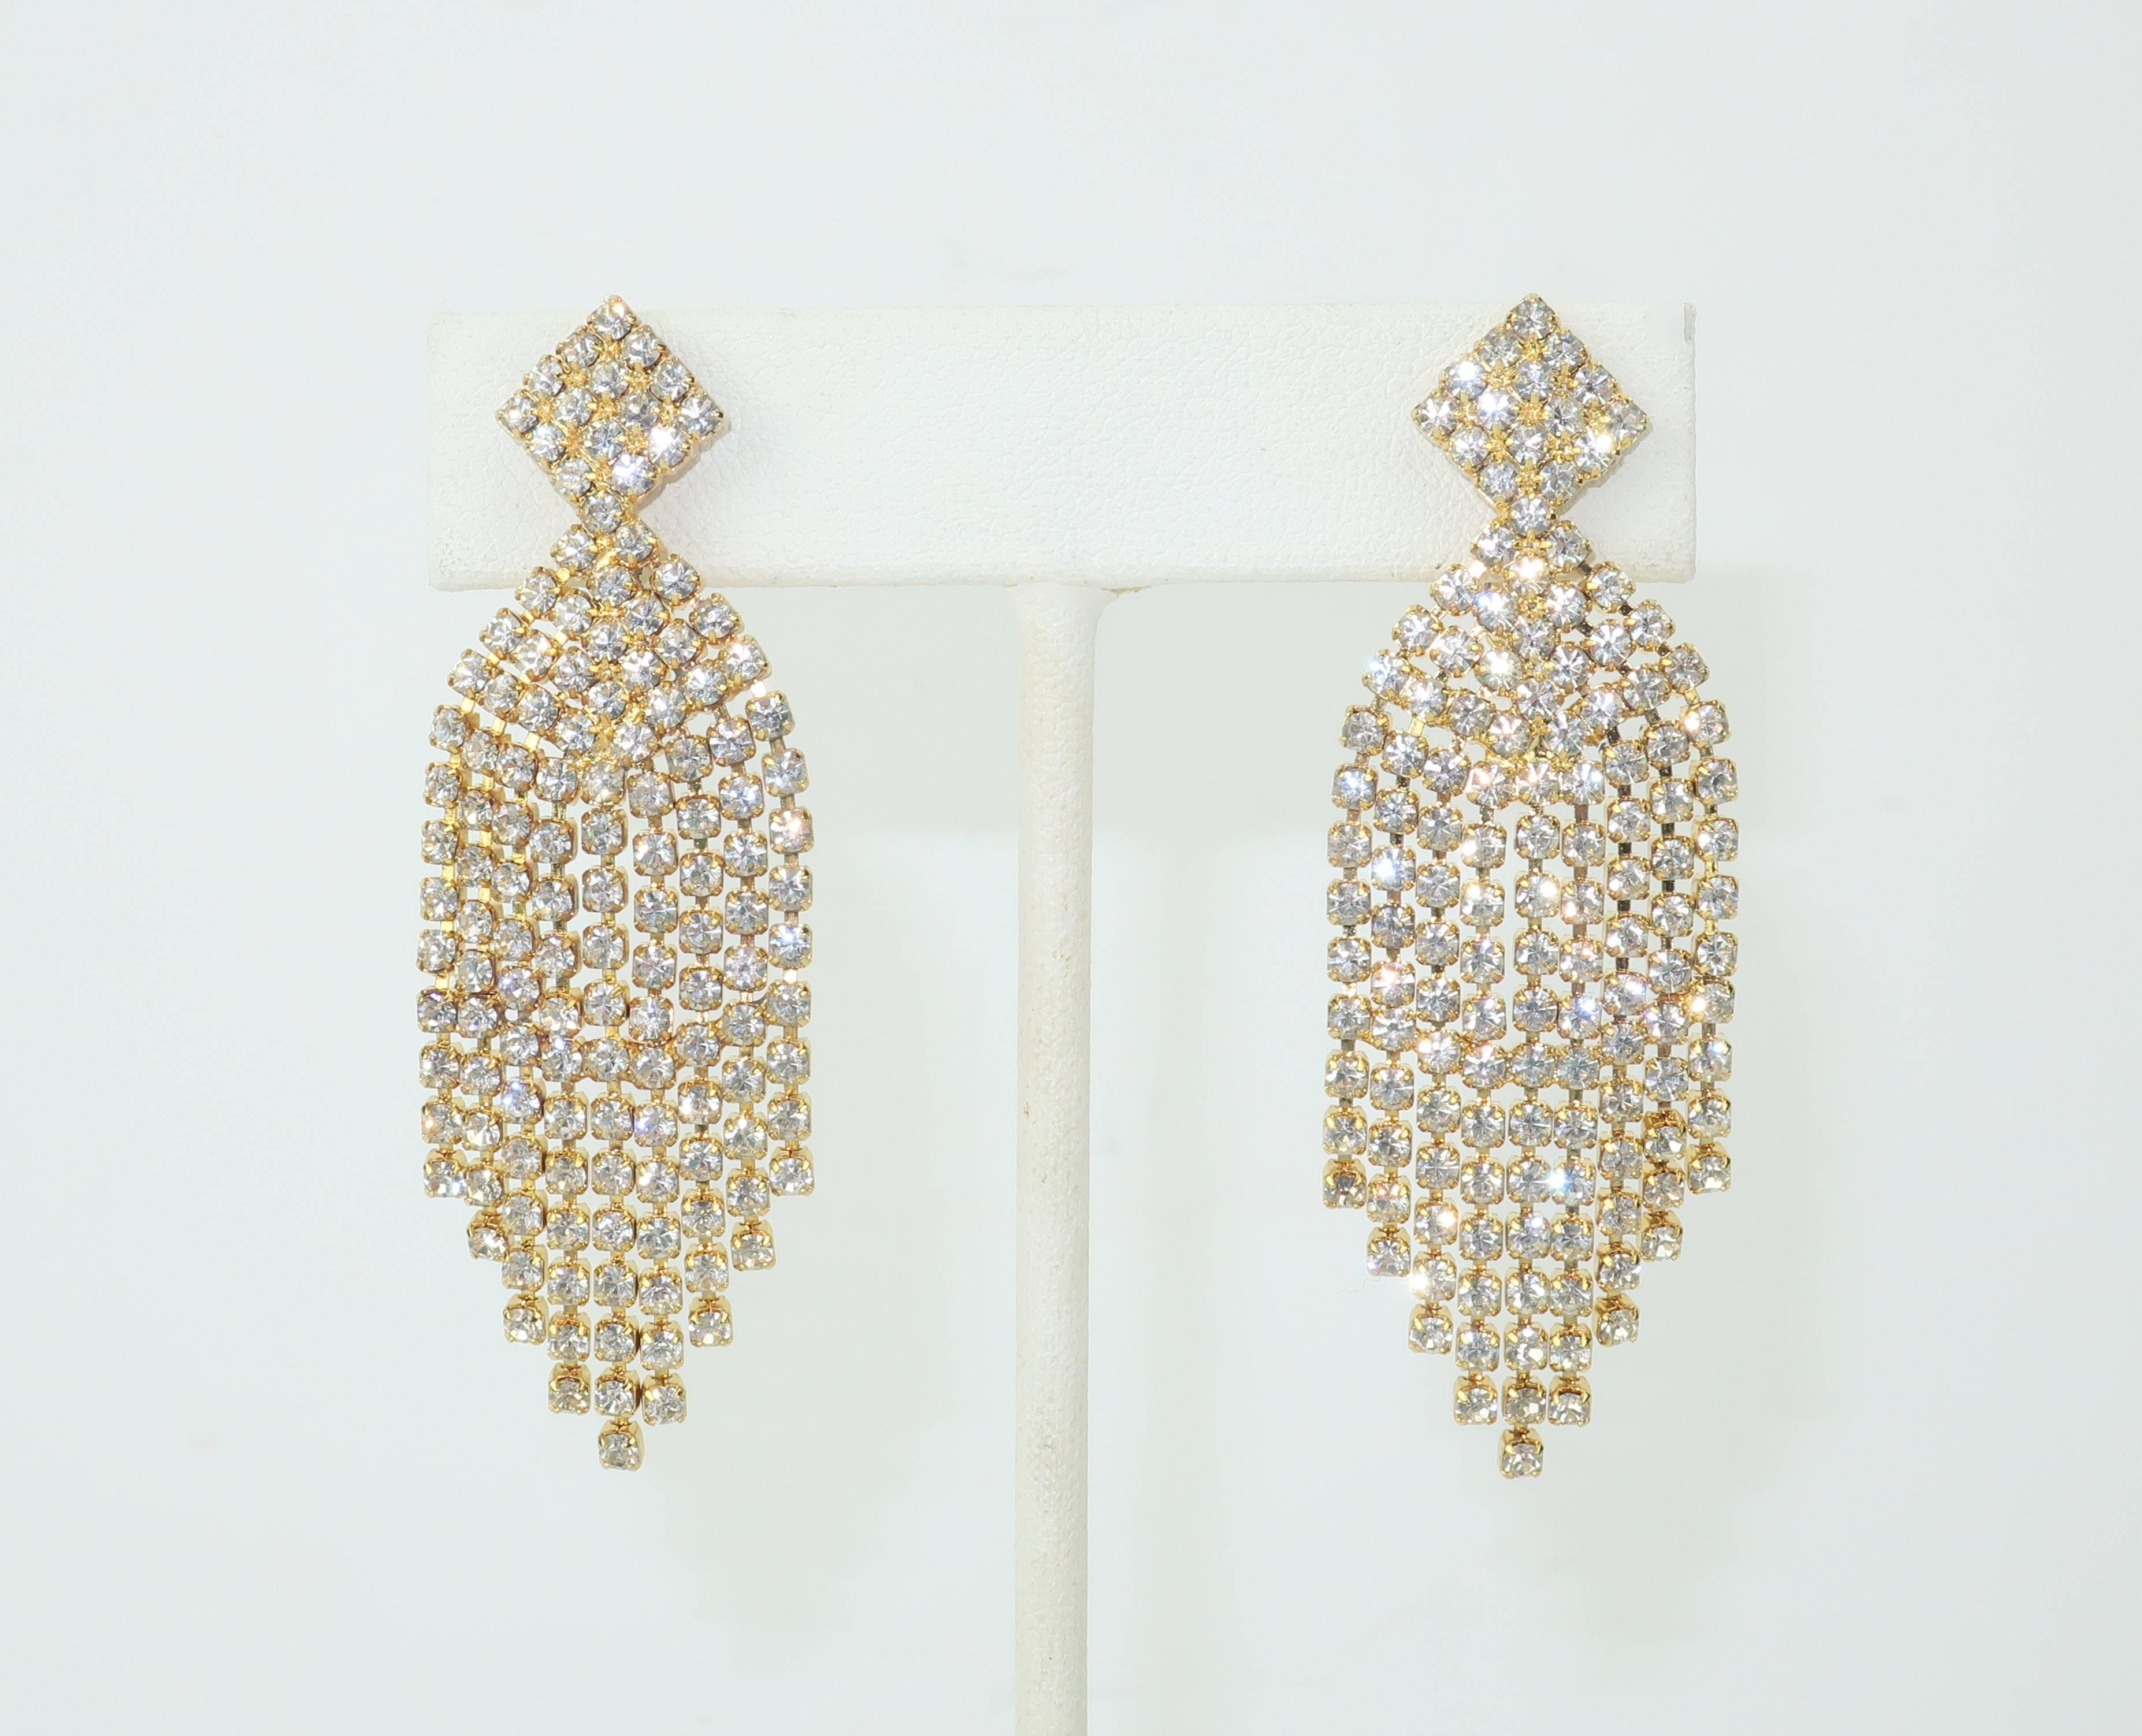 Les Bernard's founders, Bernard Shapiro and Lester Joy, were committed to creating high quality costume jewelry with an eye for innovation and classic style.  These waterfall earrings are beautifully made with a gold tone screw back clip on base and